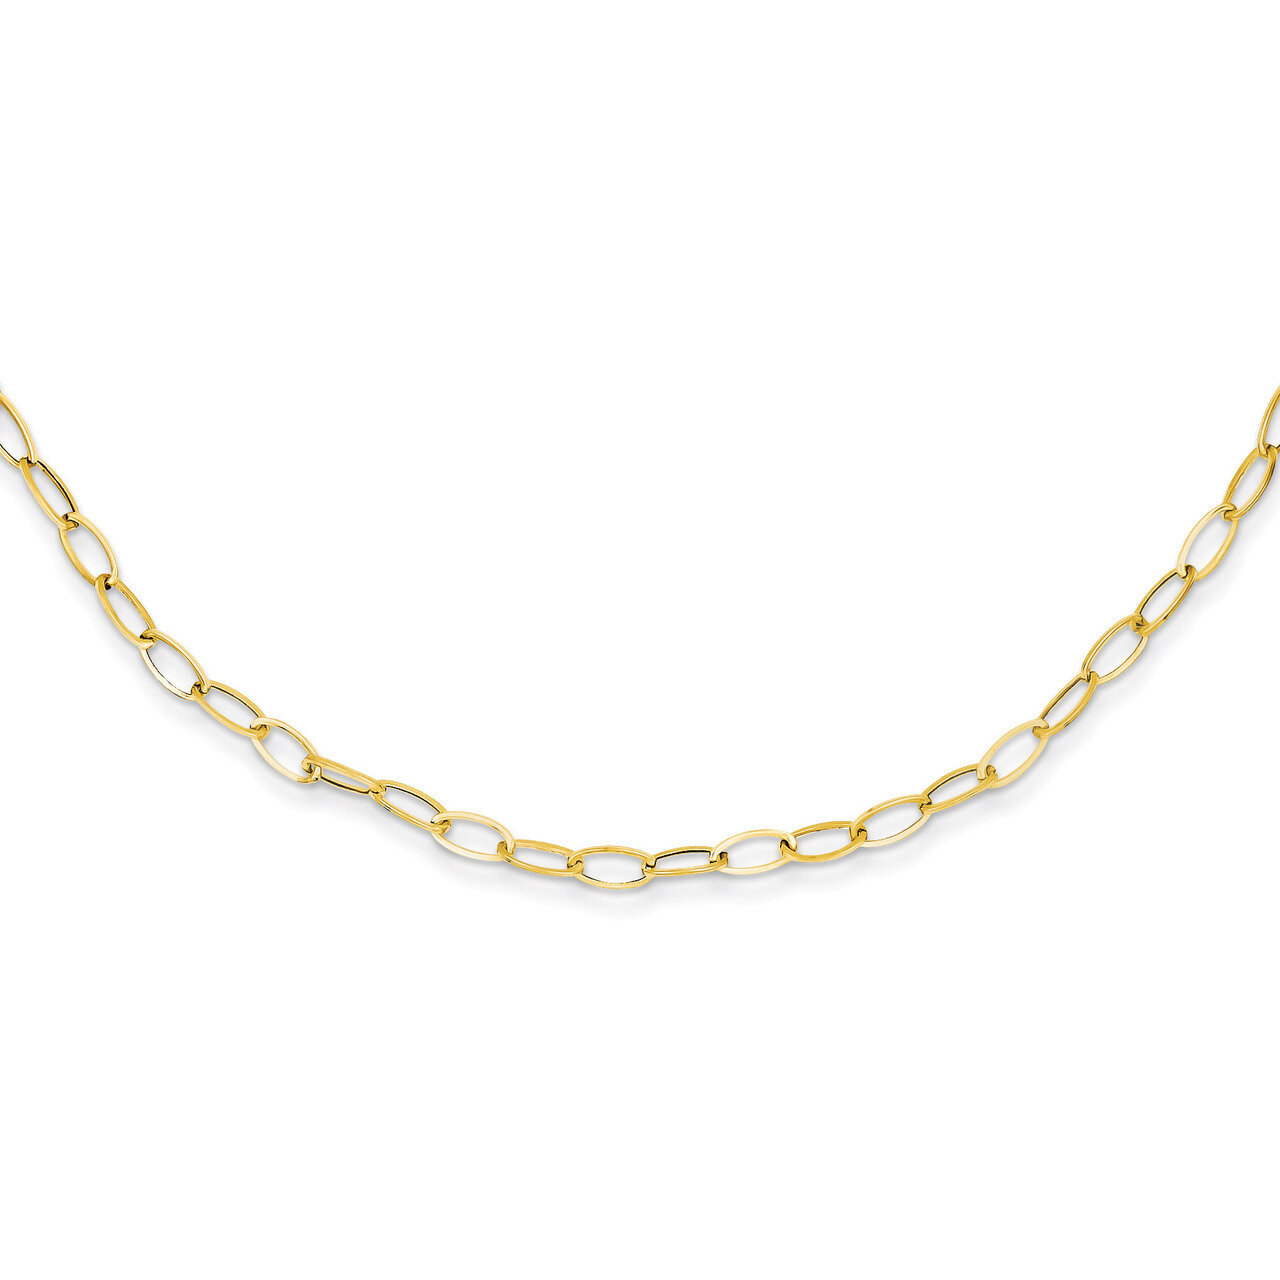 Oval Link Necklace 18 Inch 14k Gold SF1854-18